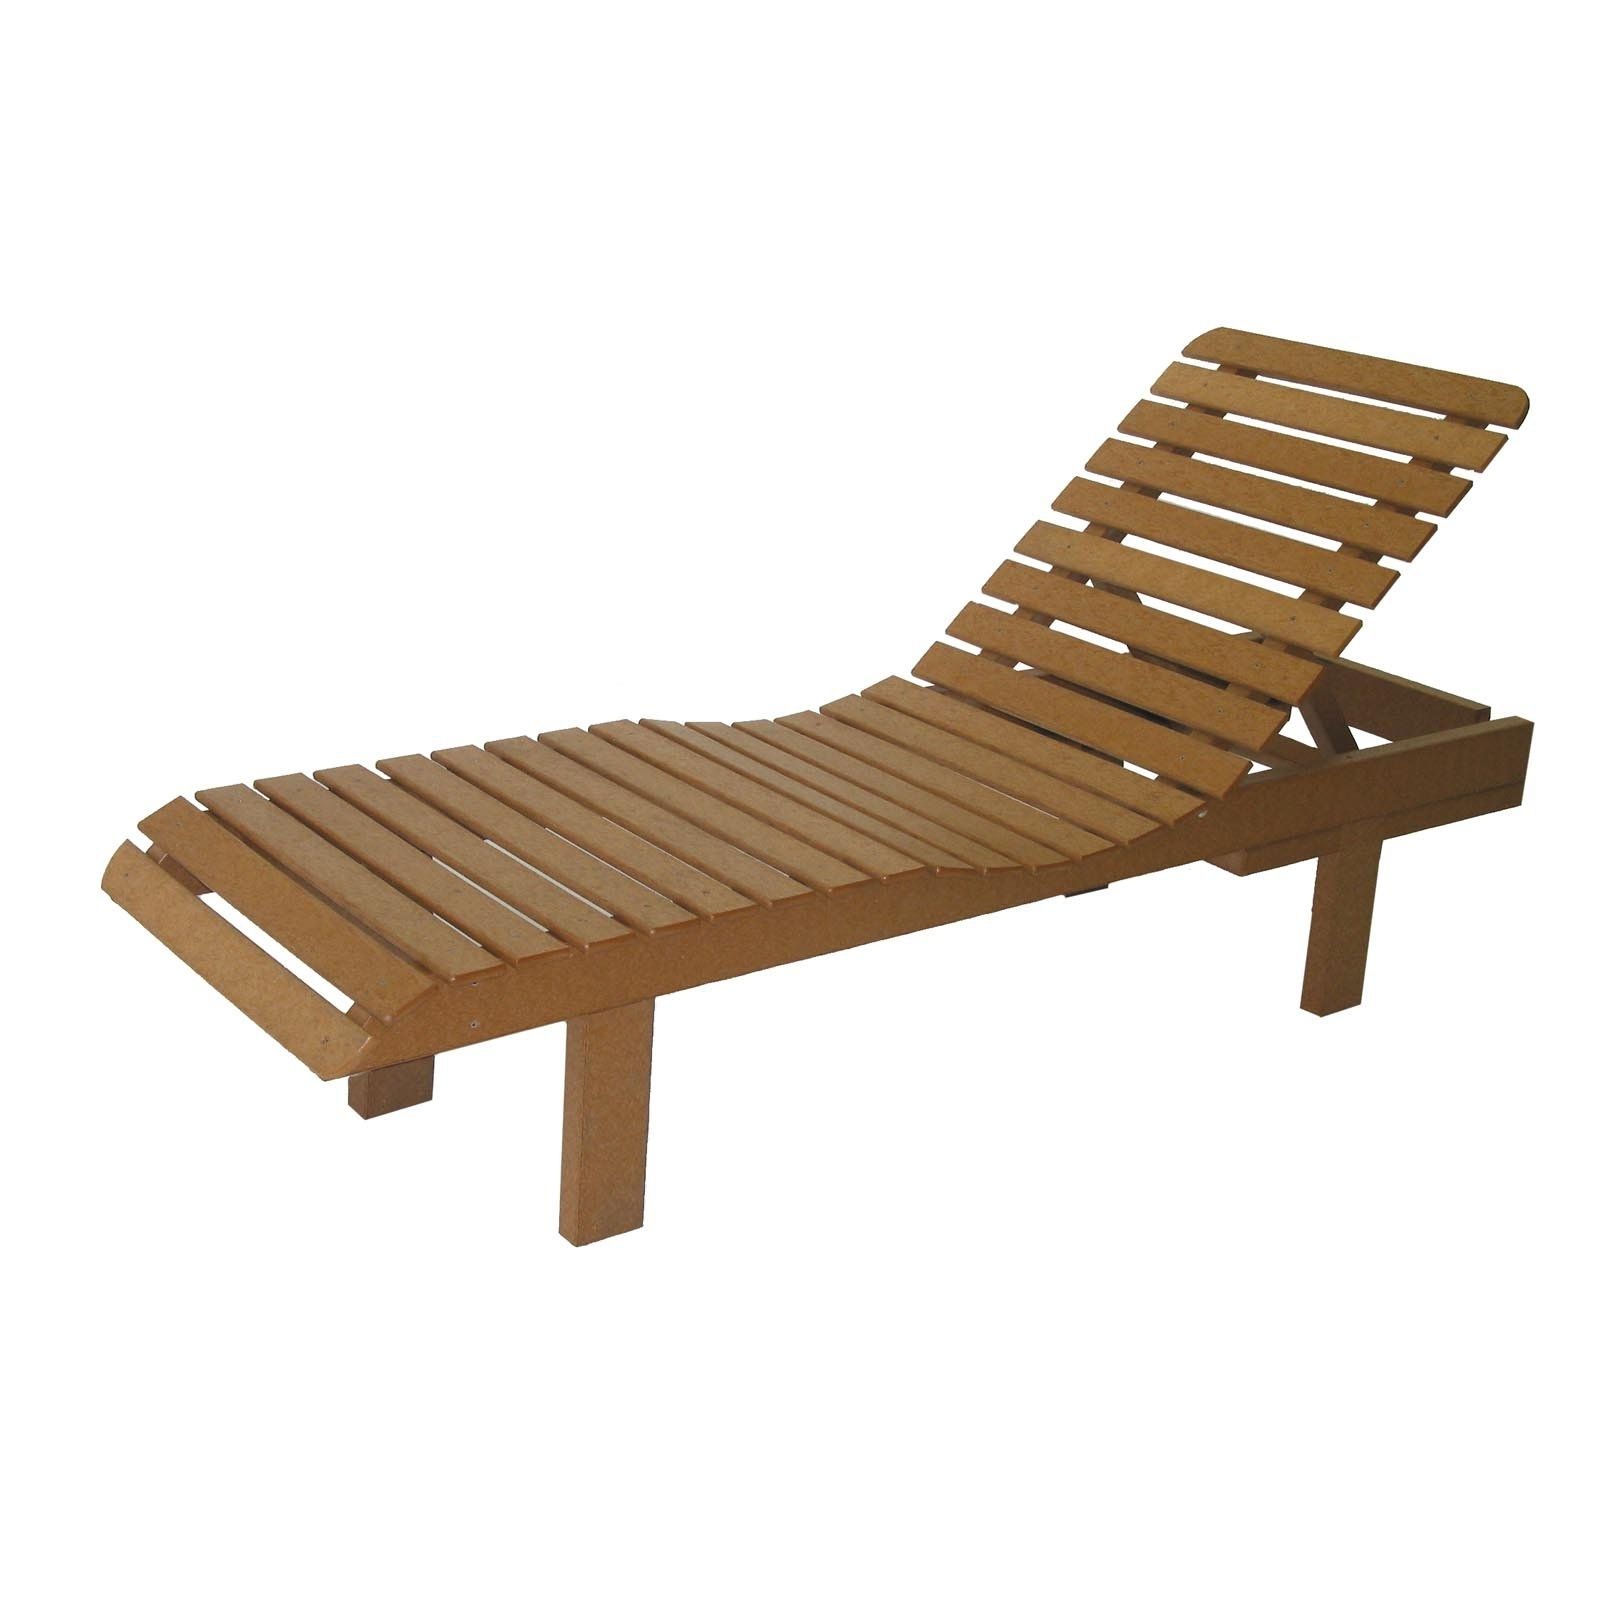 15 Best Collection of Wood Chaise Lounge Chairs